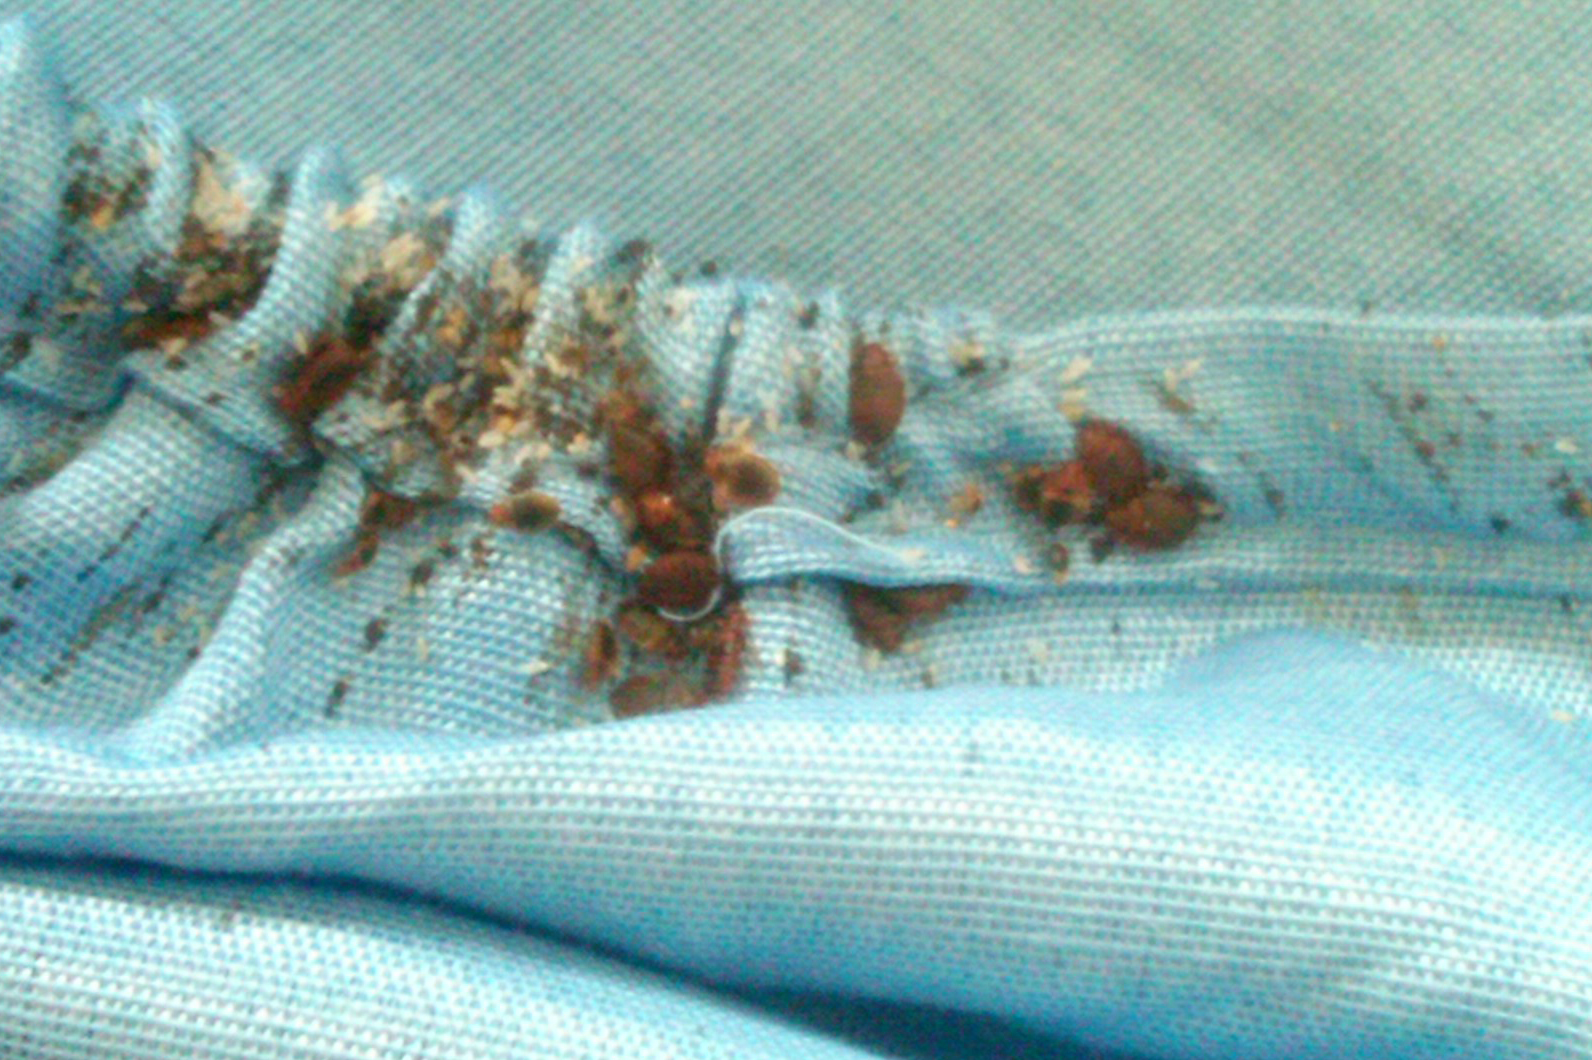 ... Up the Heat on Bedbugs with a Heating System that Fries Bed Bugs Dead